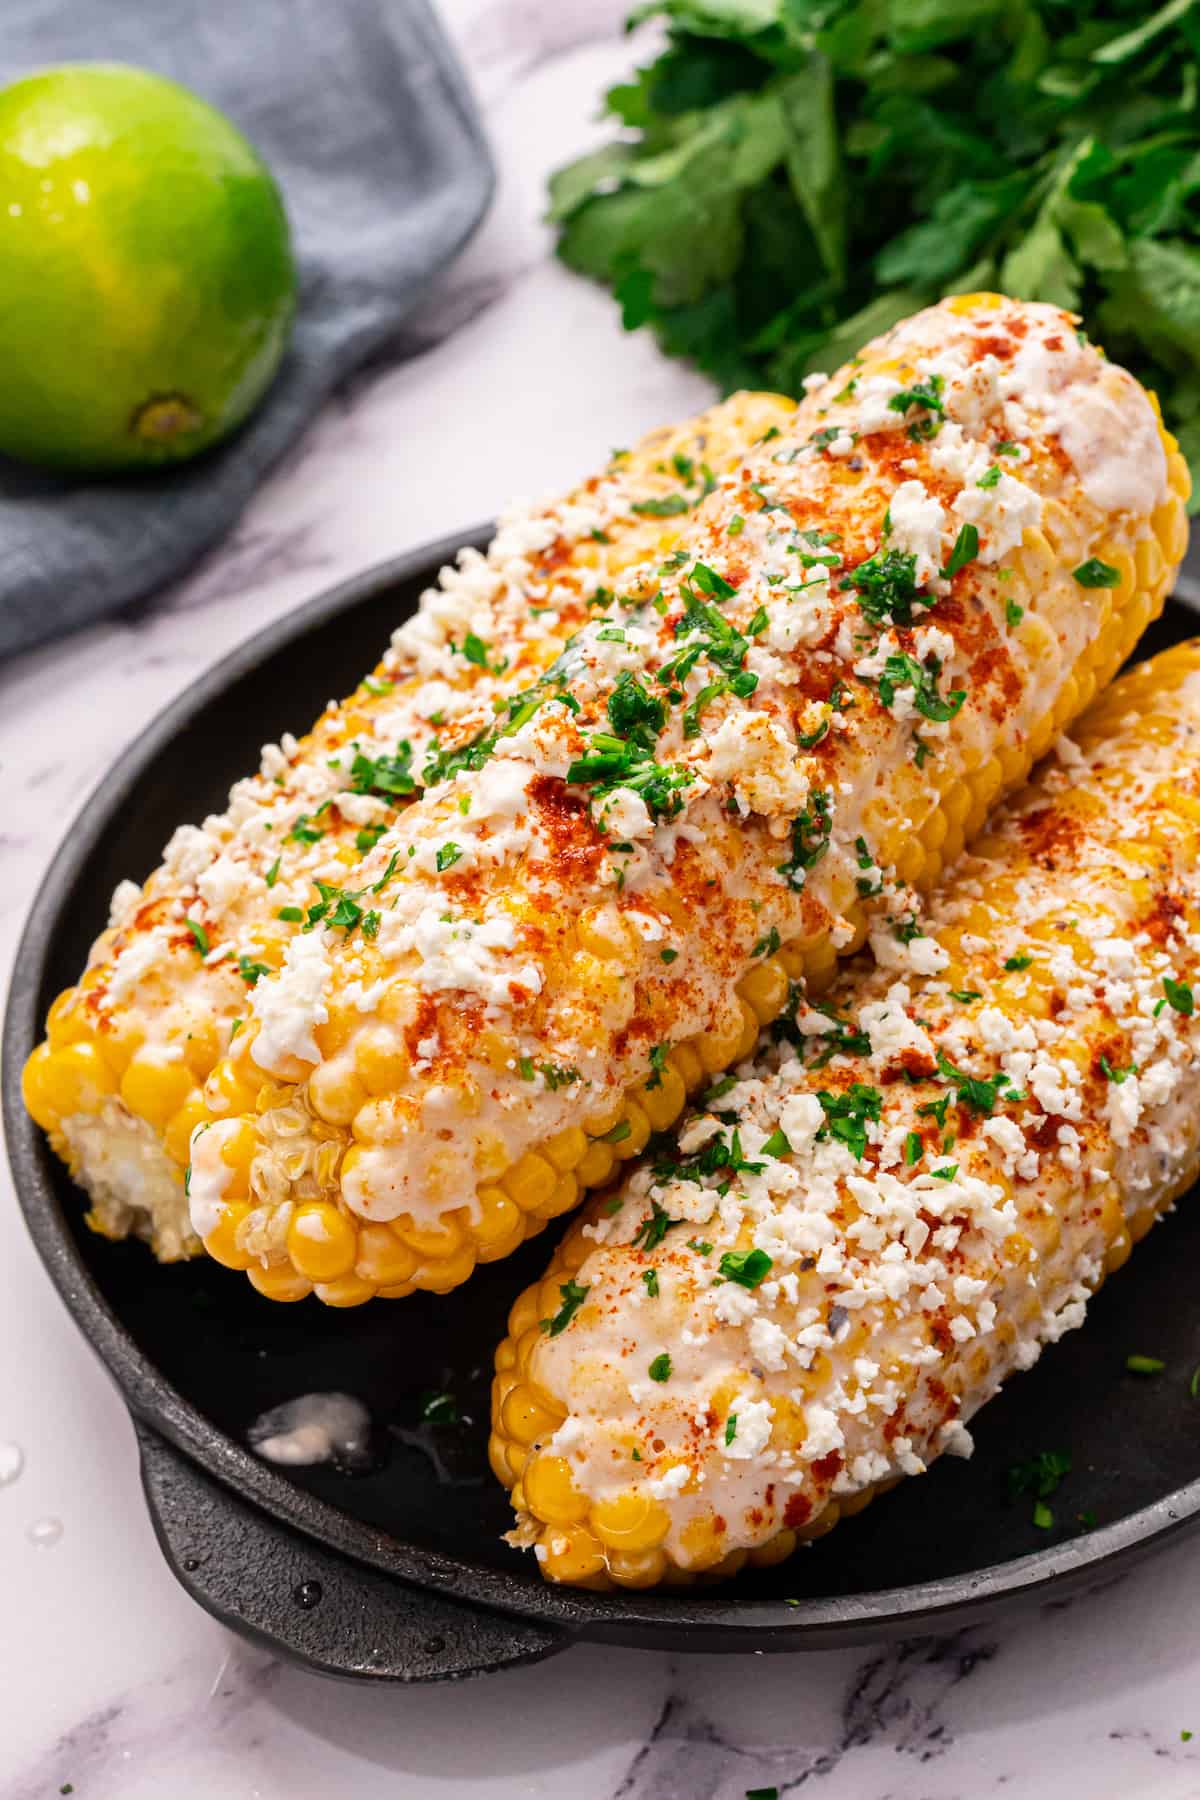 Corn with Mexican seasoning on a black plate